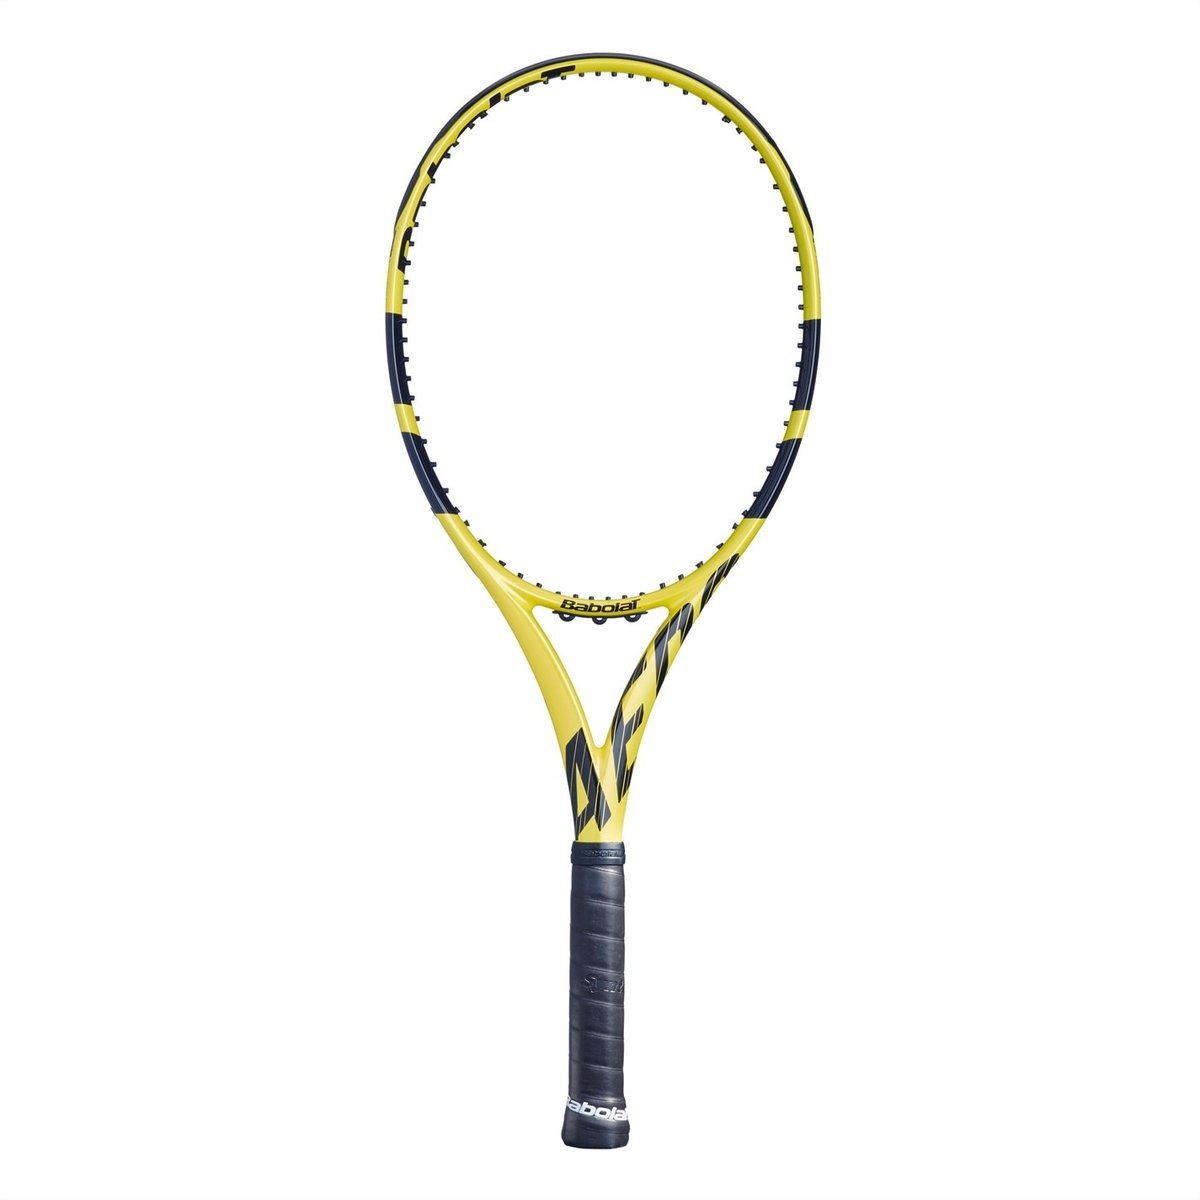 All Babolat items